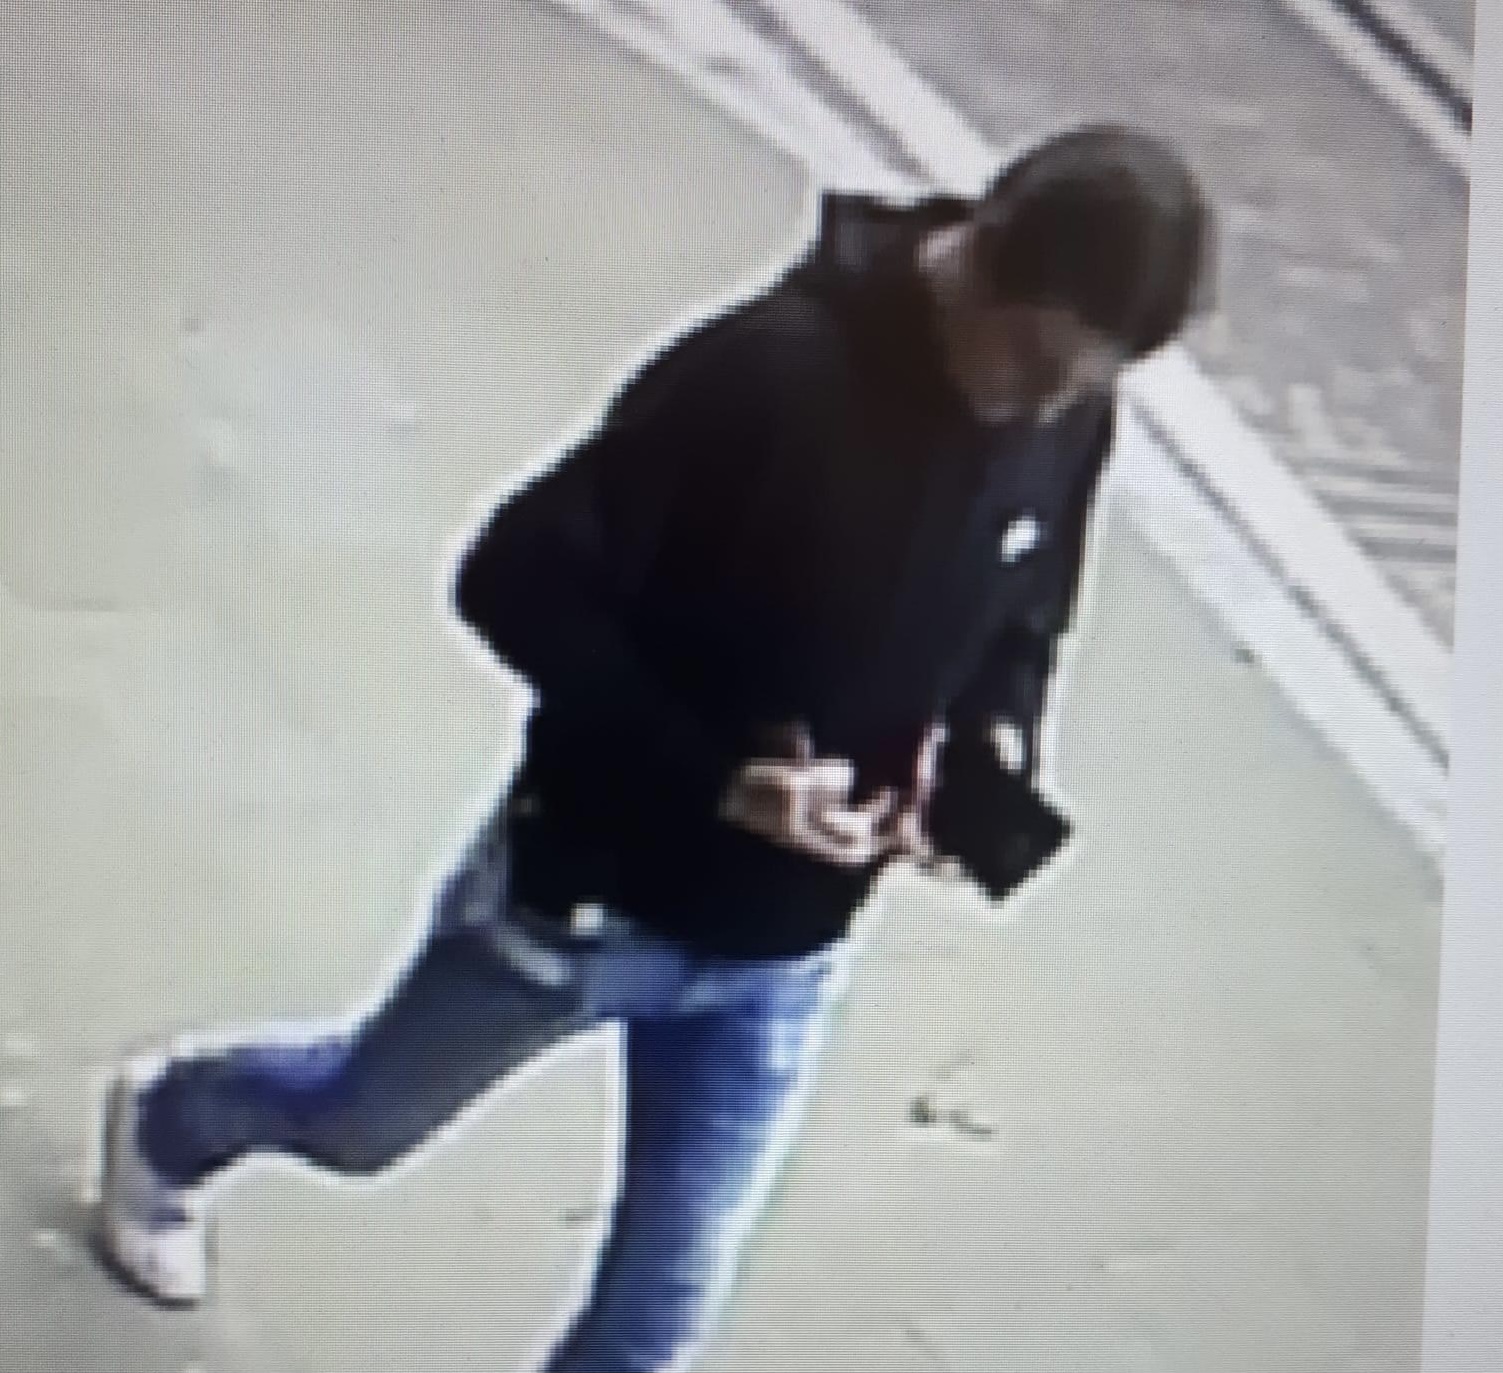 NEWS | Police would like to speak to this man following incident in Hereford